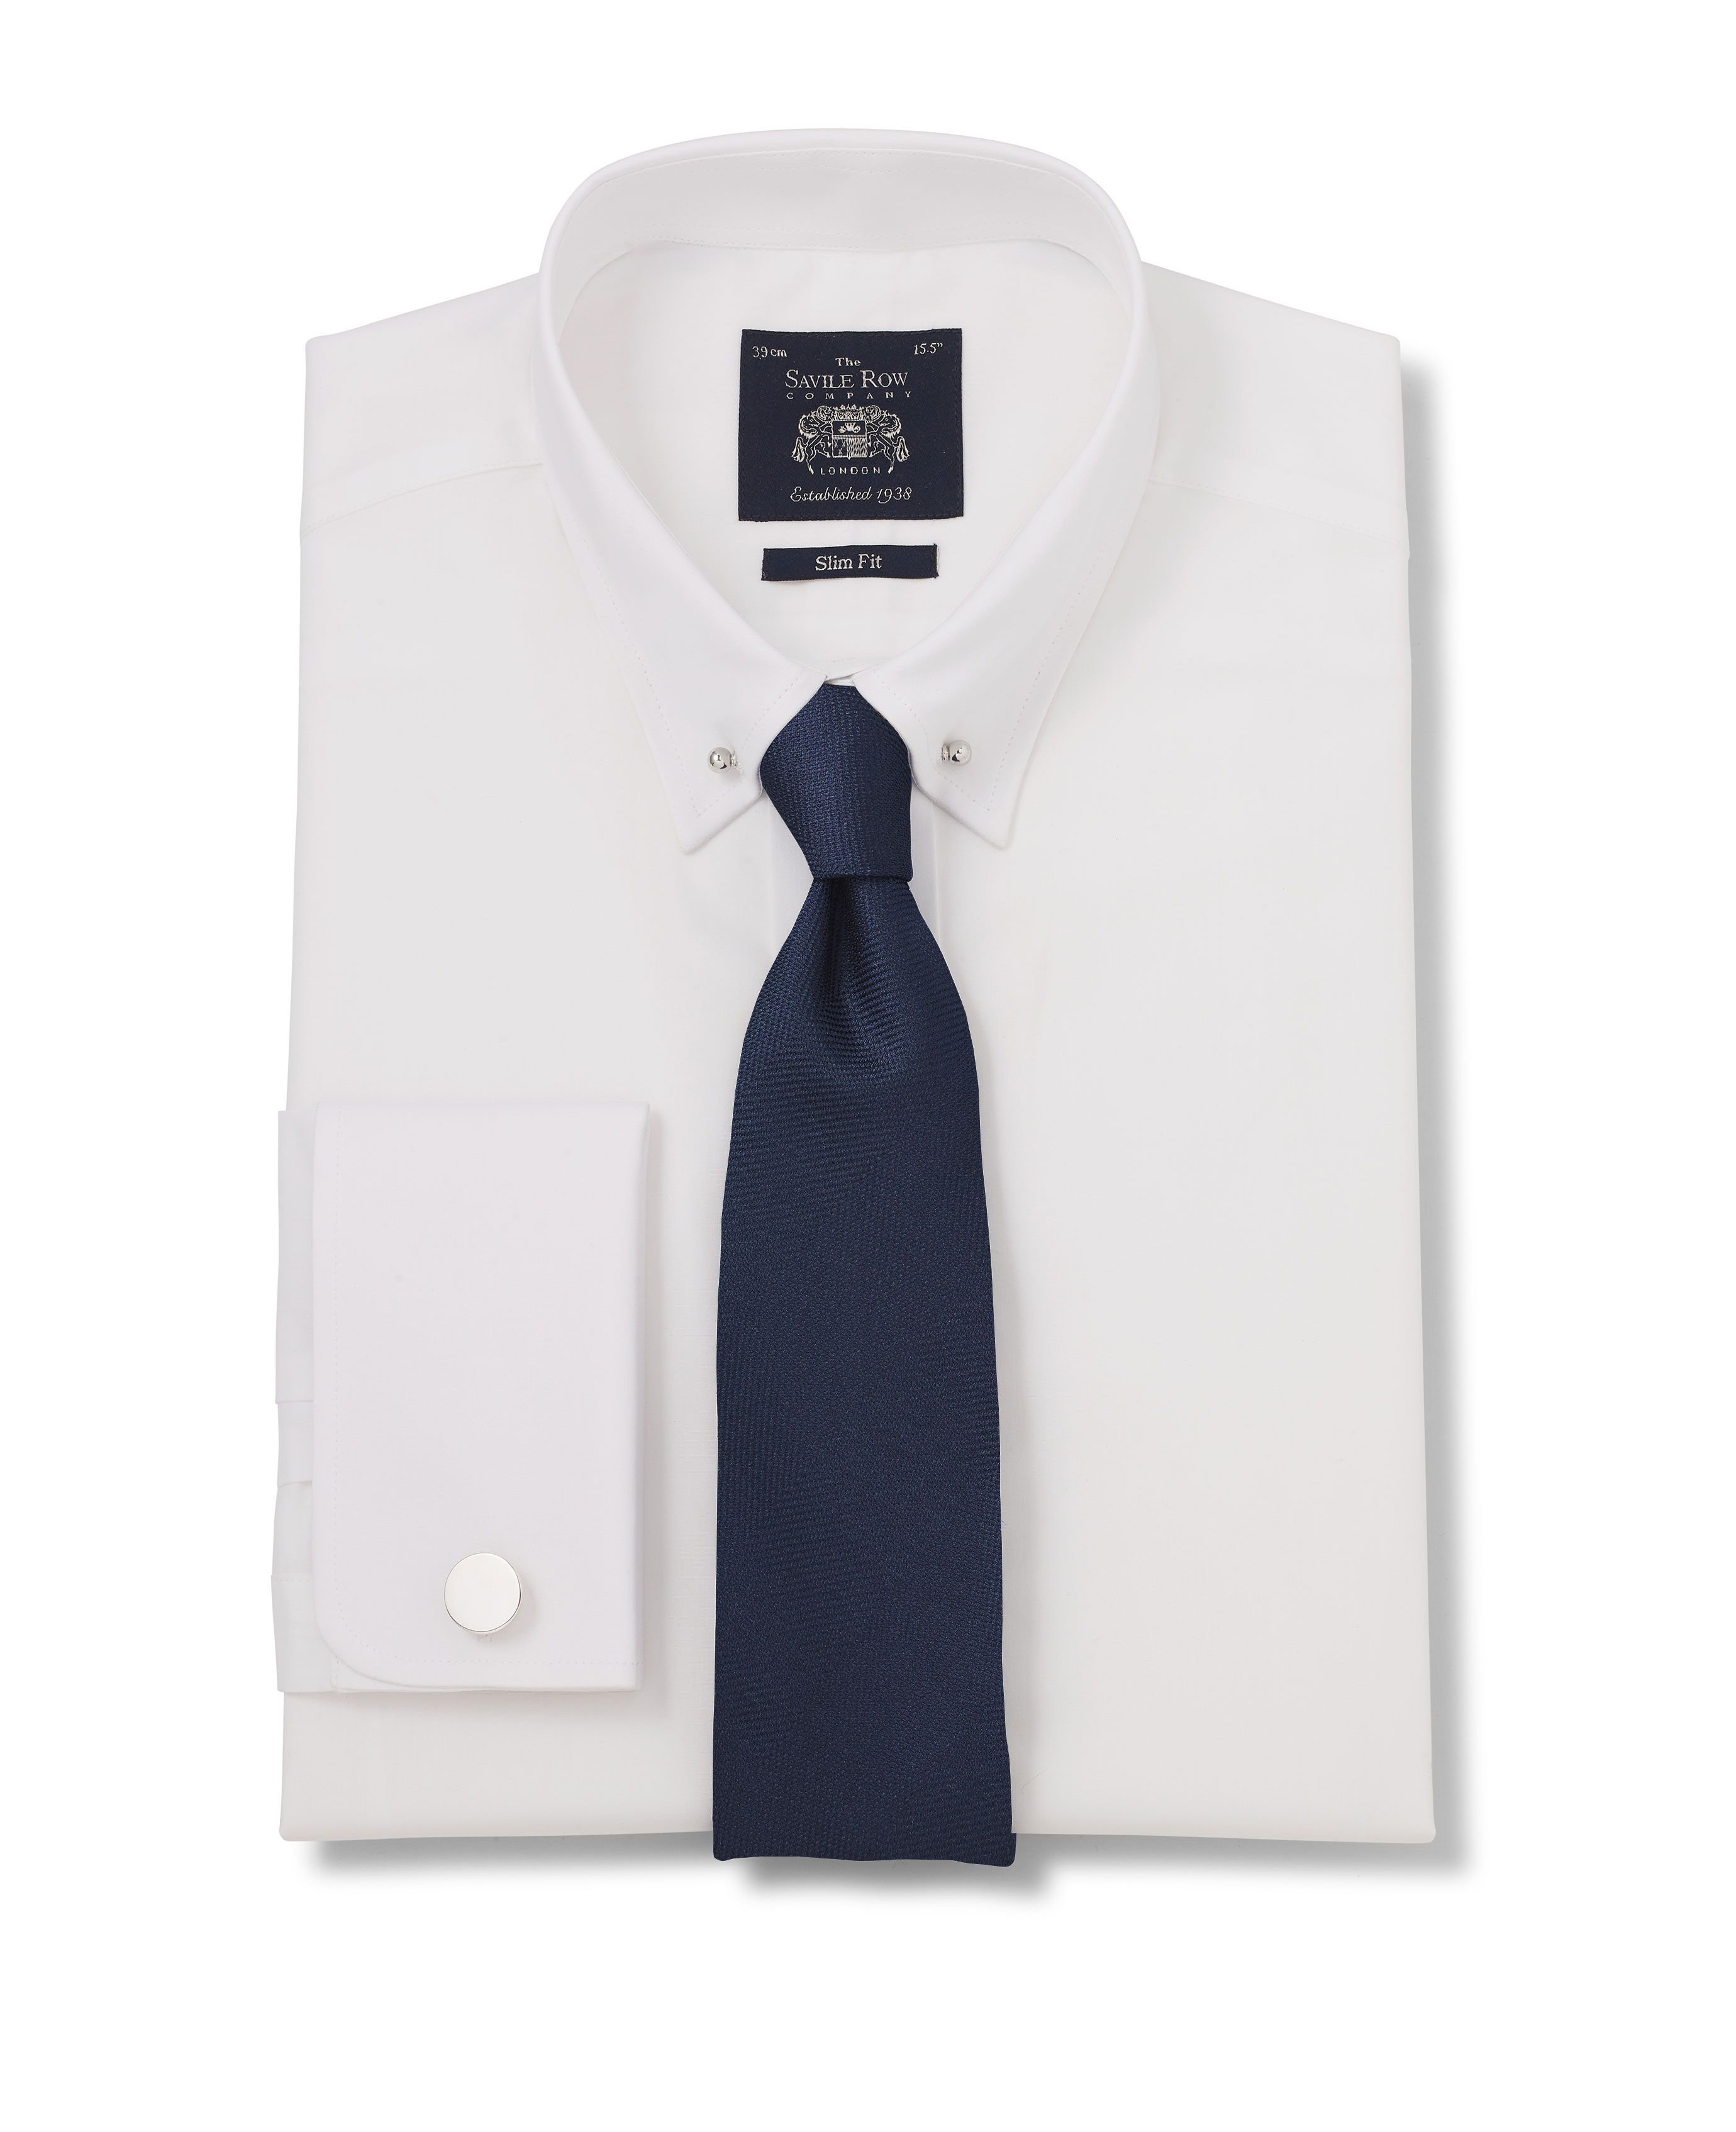 Verslaafd Justitie Voorkomen Mens White Pin Collar Slim Fit Shirt With Double Cuffs | Savile Row Co